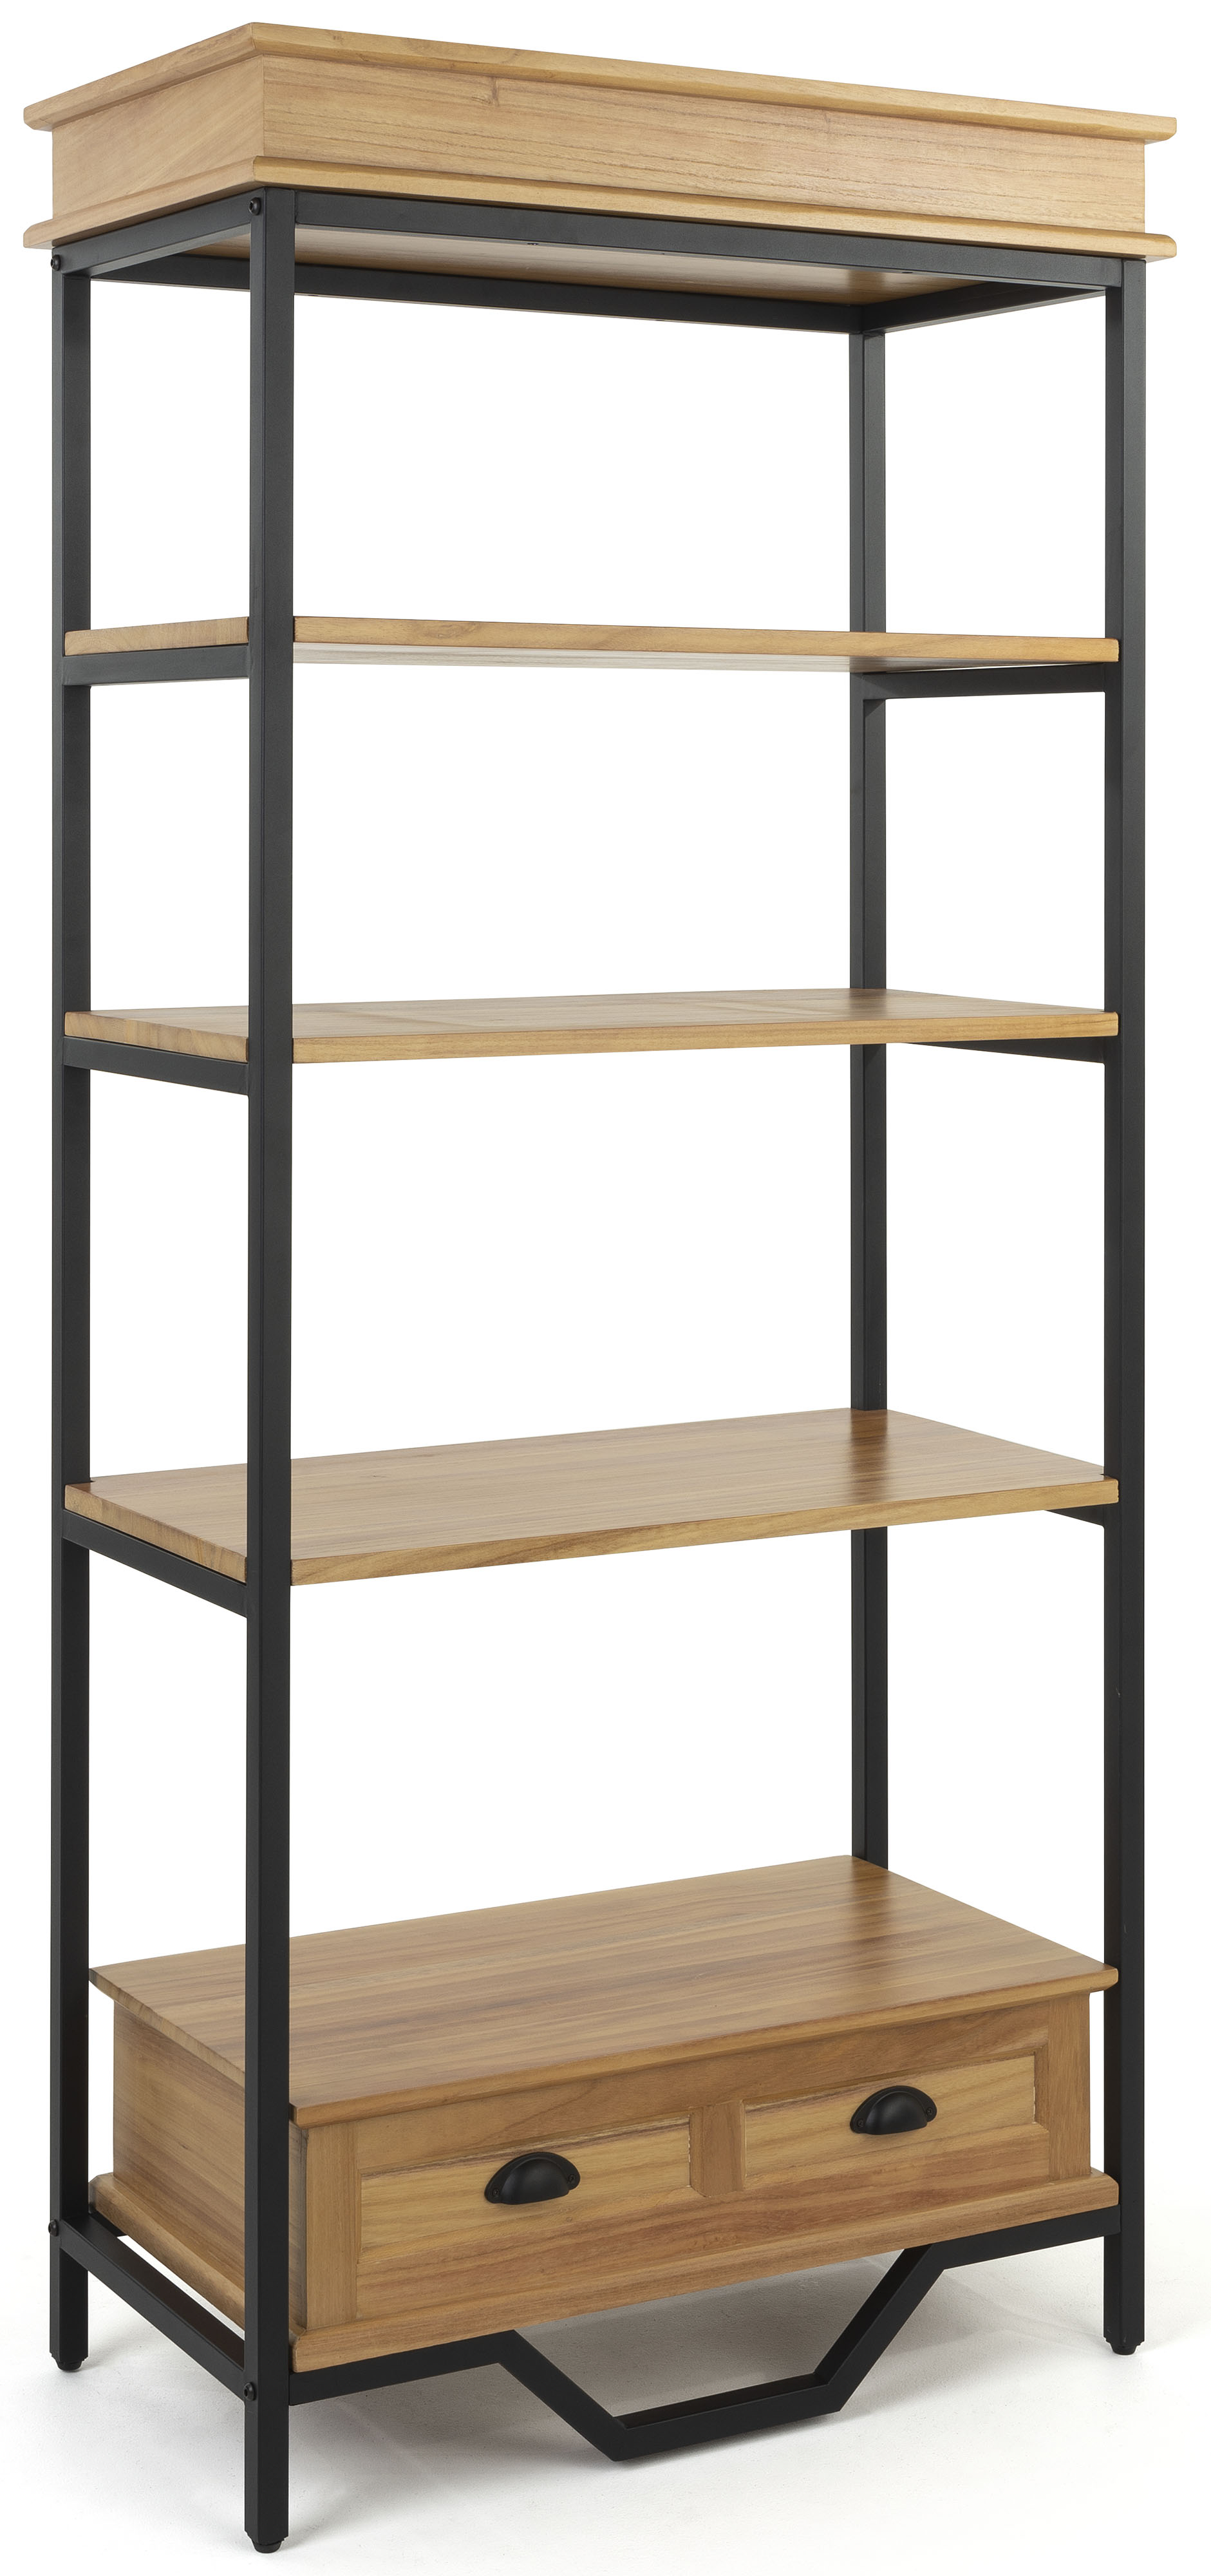 FABULAXE Industrial 67.5 in. Brown Wood and Metal 5-Shelf Etagere